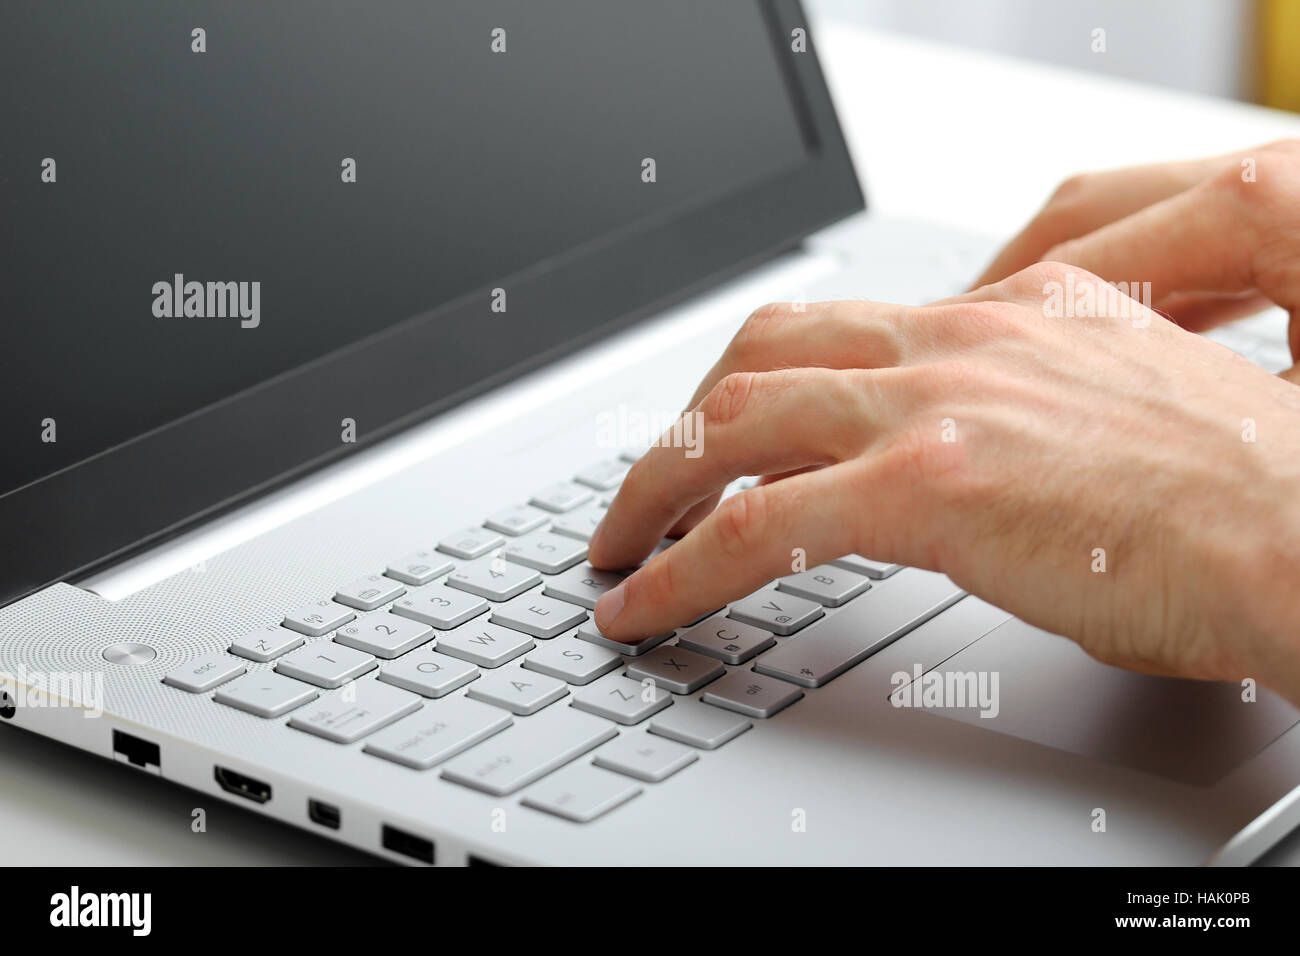 Hands typing on laptop keyboard Banque D'Images